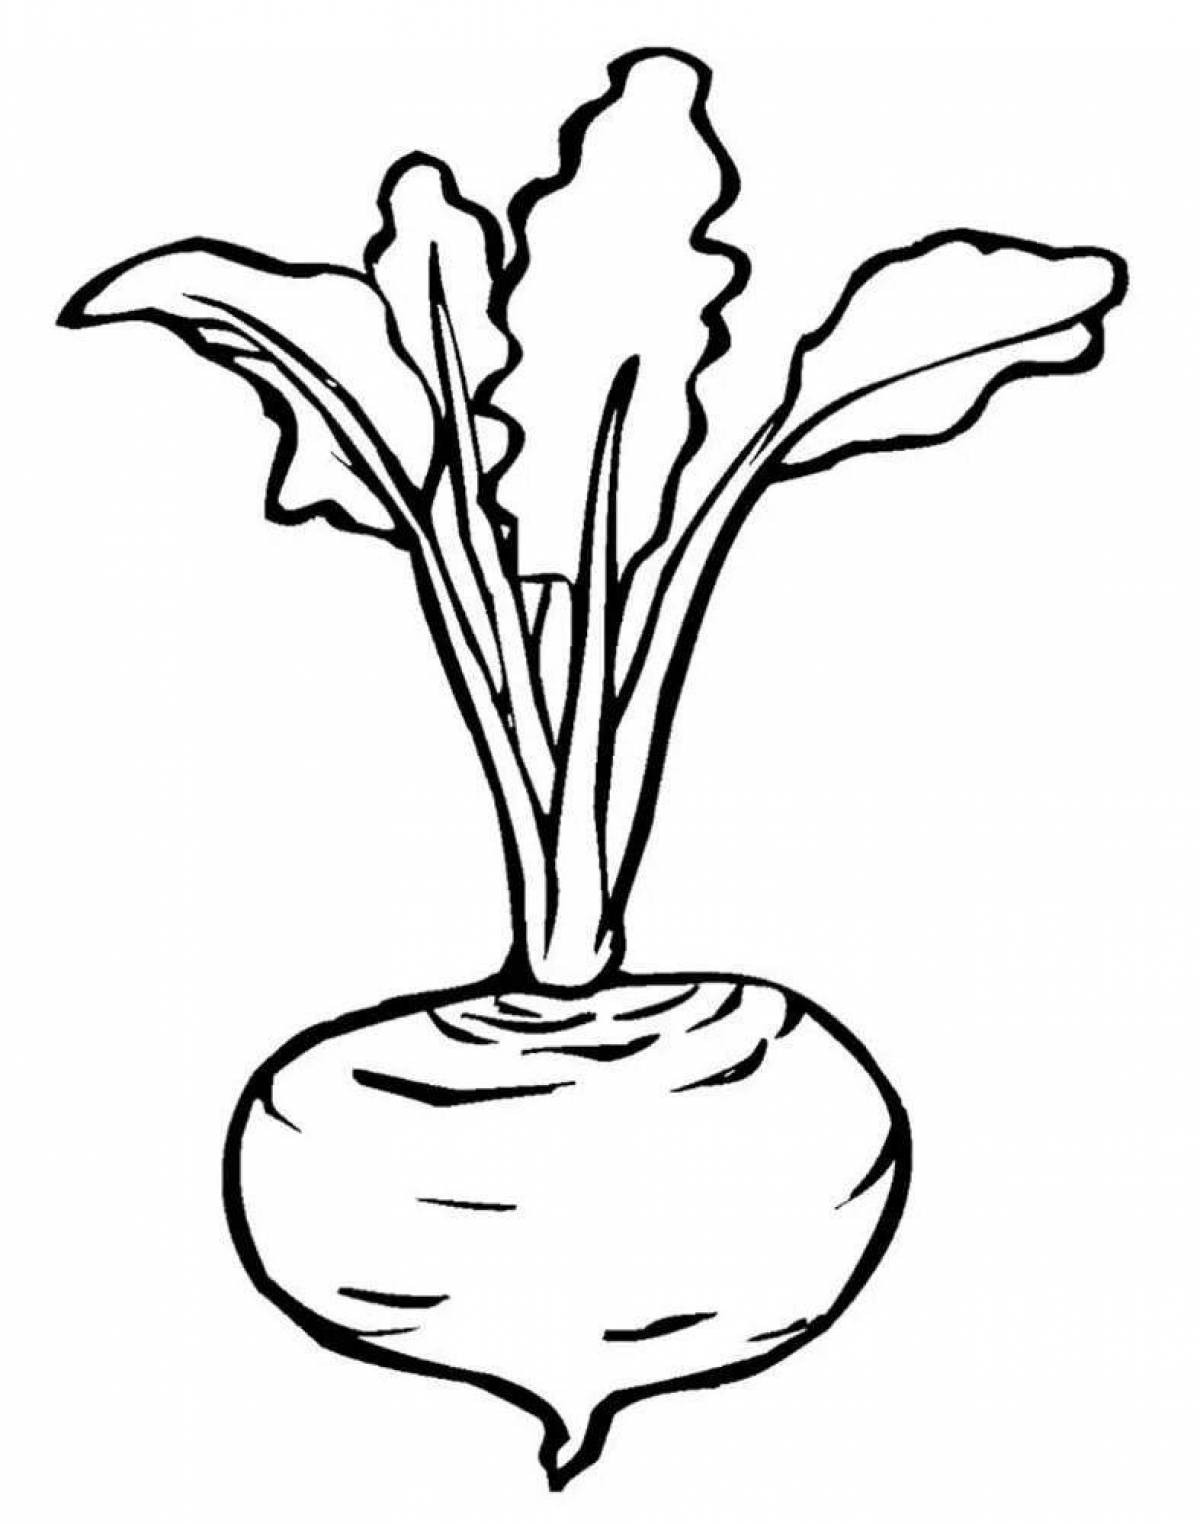 Distinctive beetroot coloring pages for kids